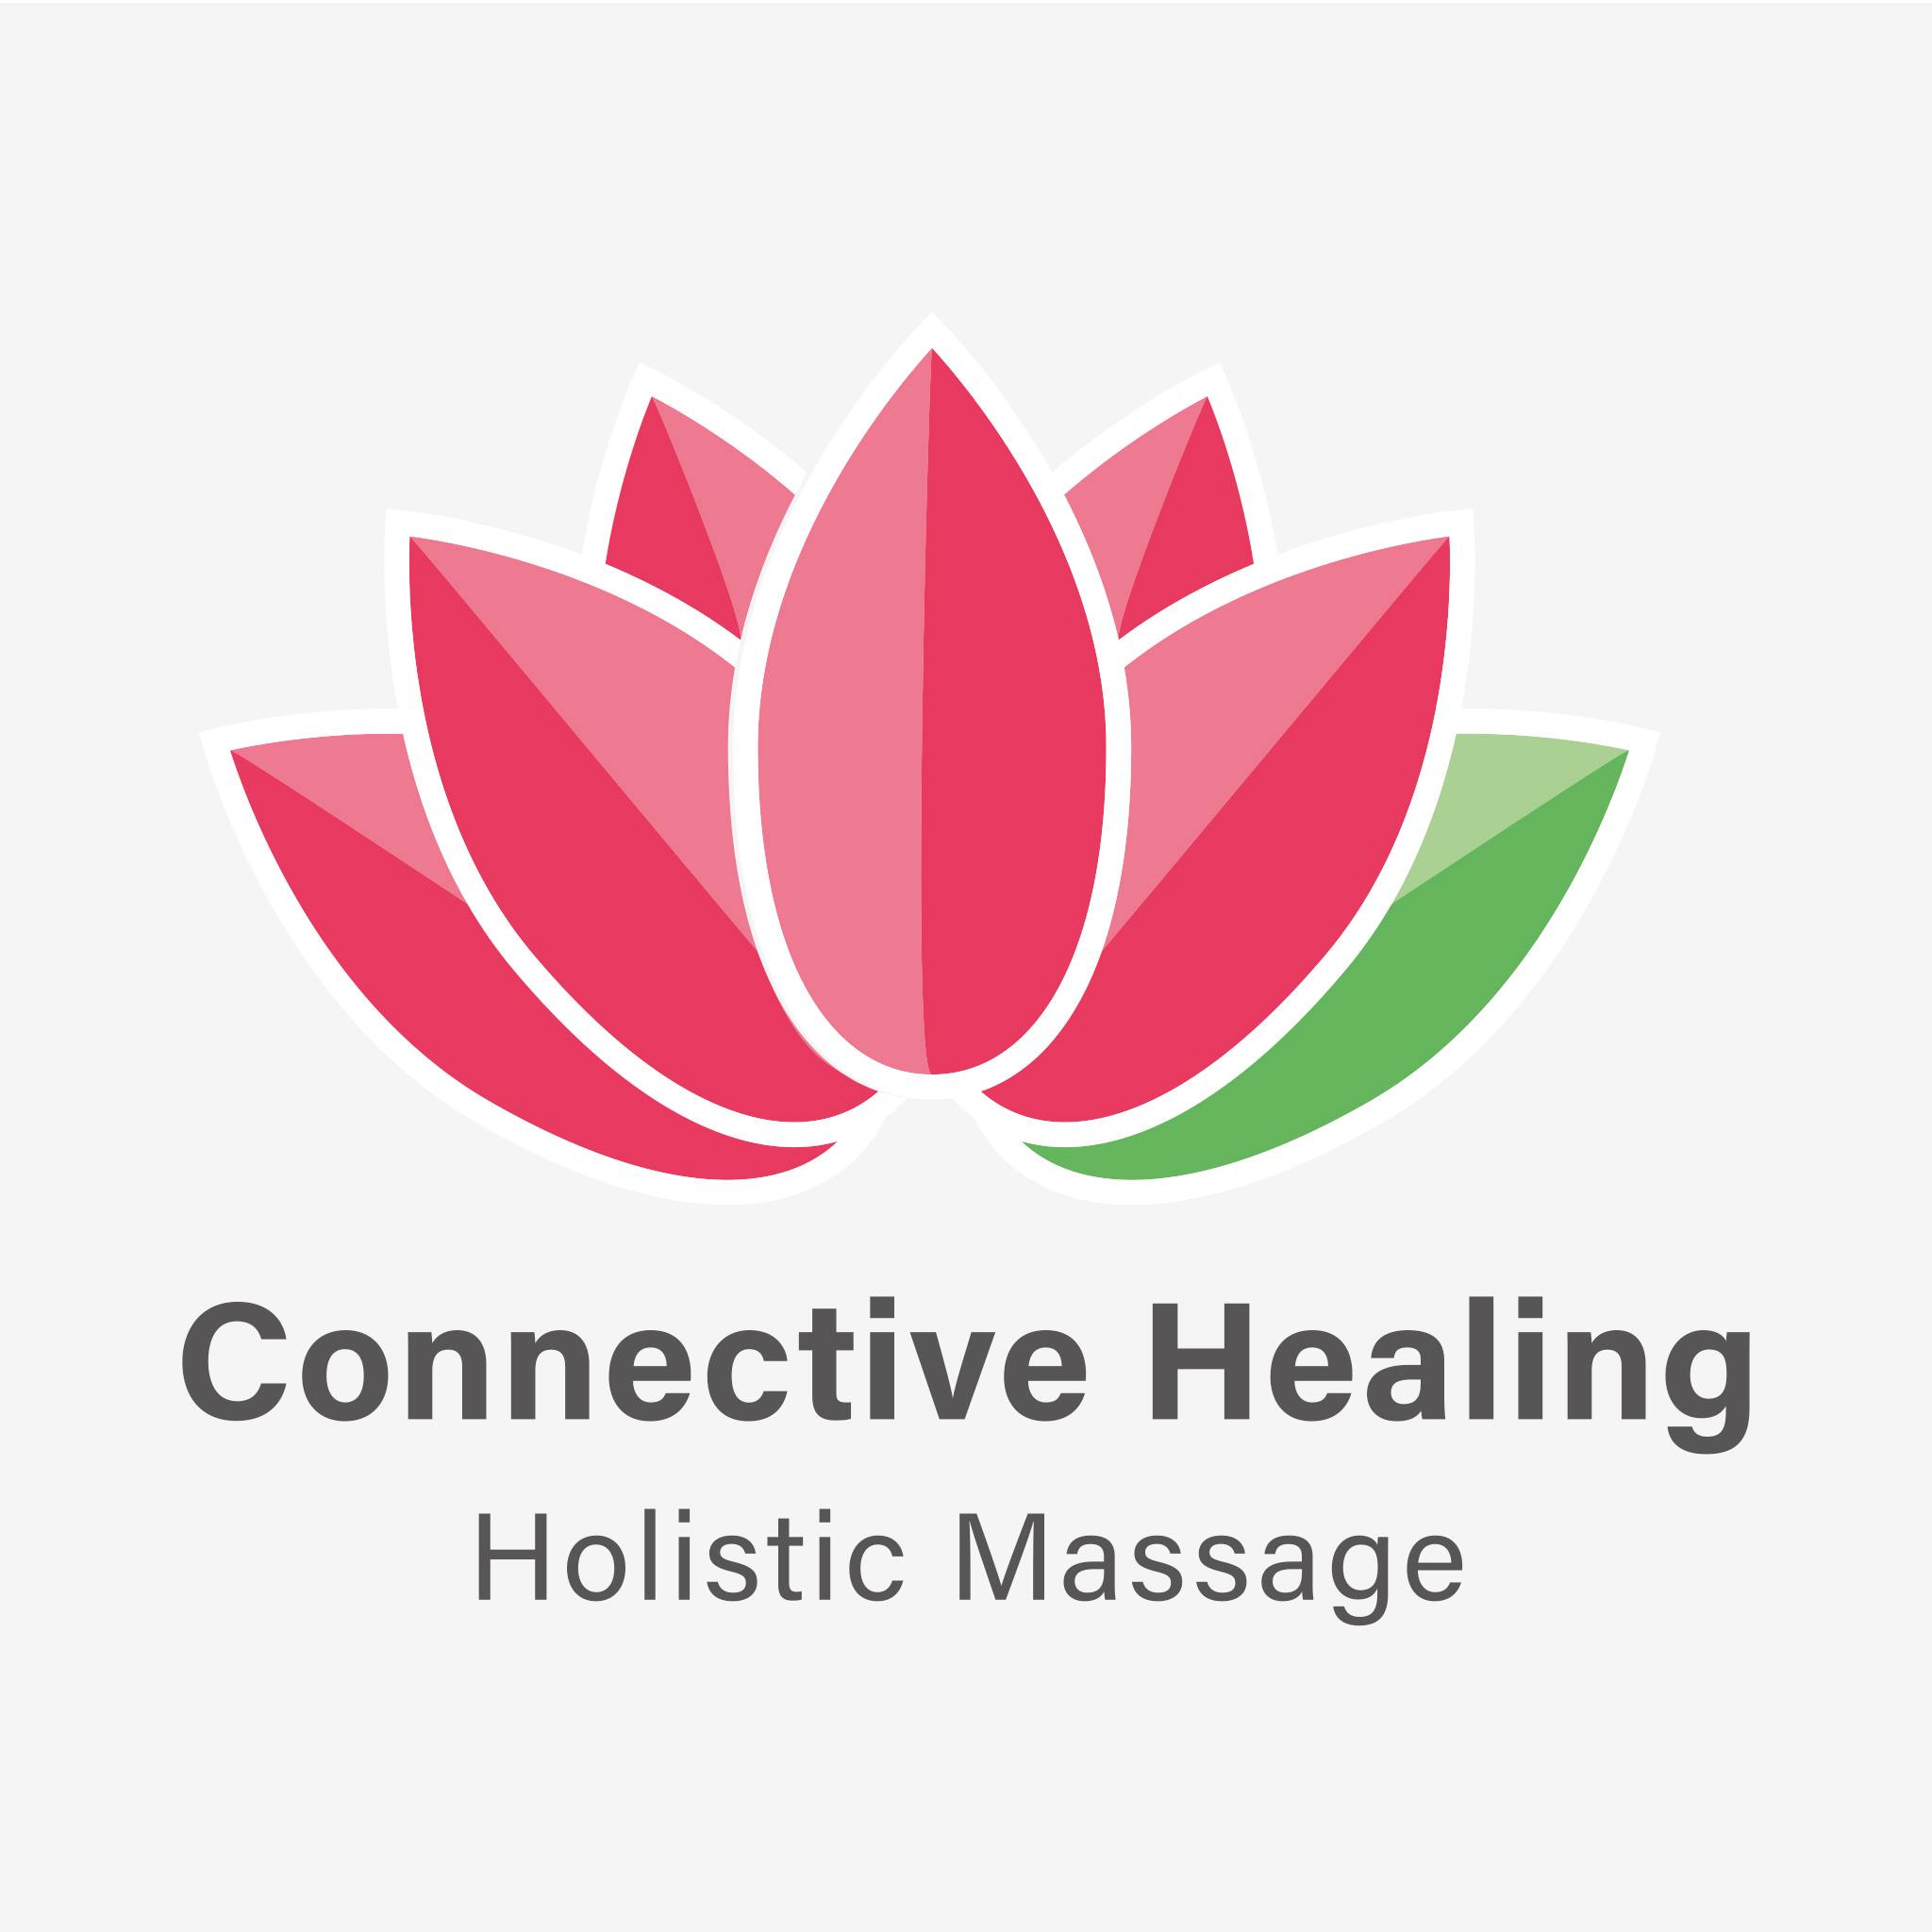 Connective Healing